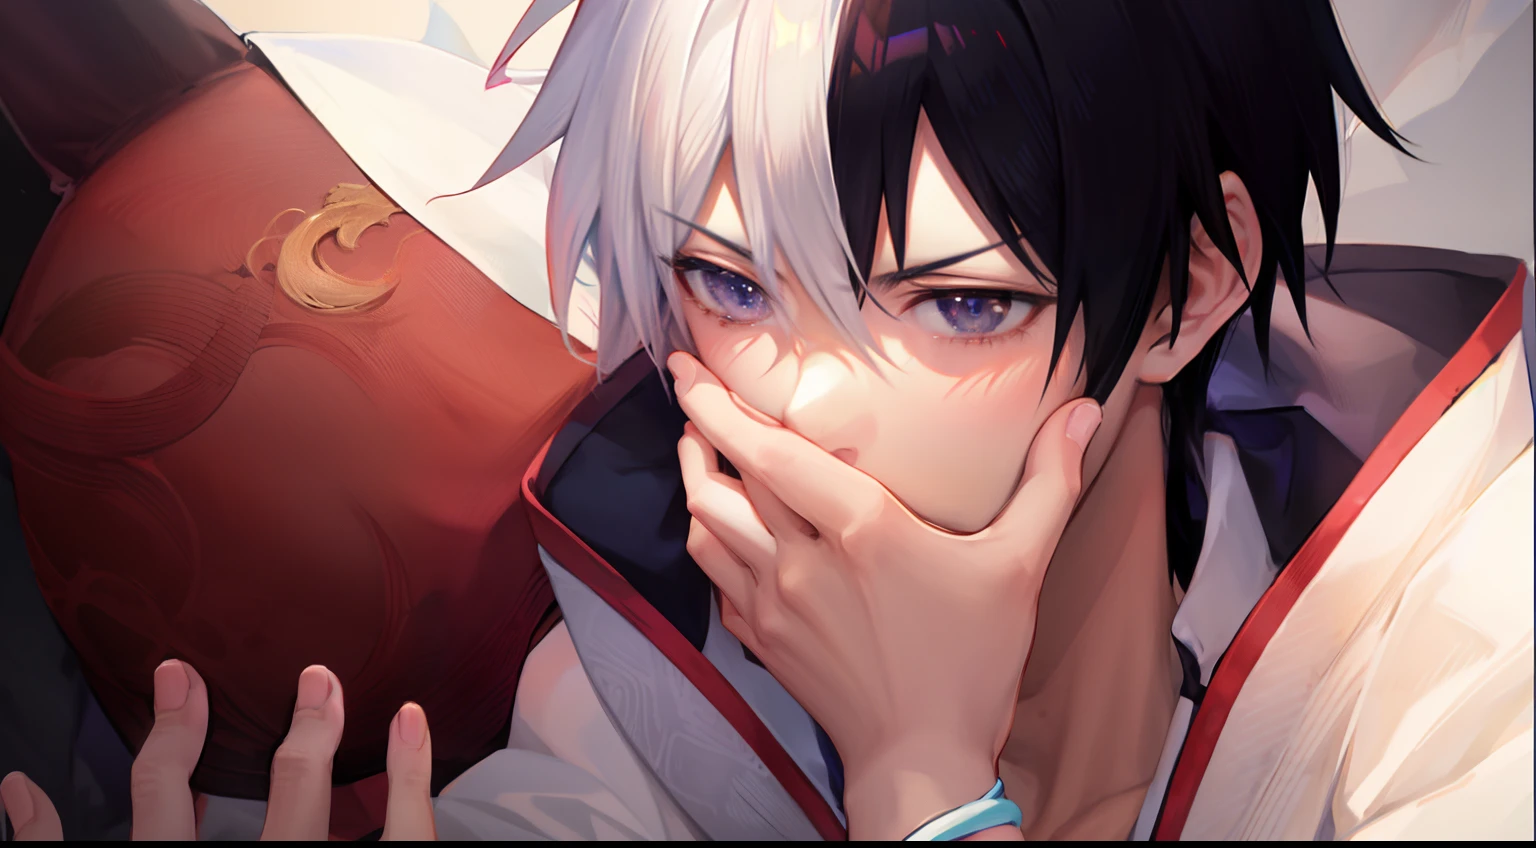 anime guy with white hair and red eyes holding a purple ball, white haired deity, male anime character, Today's Anime Still Featured, reincarnated as a slime, hajime yatate, young anime man, white fox anime, still from tv anime, key anime visuals, best anime character design, popular isekai anime, shuushuu anime image